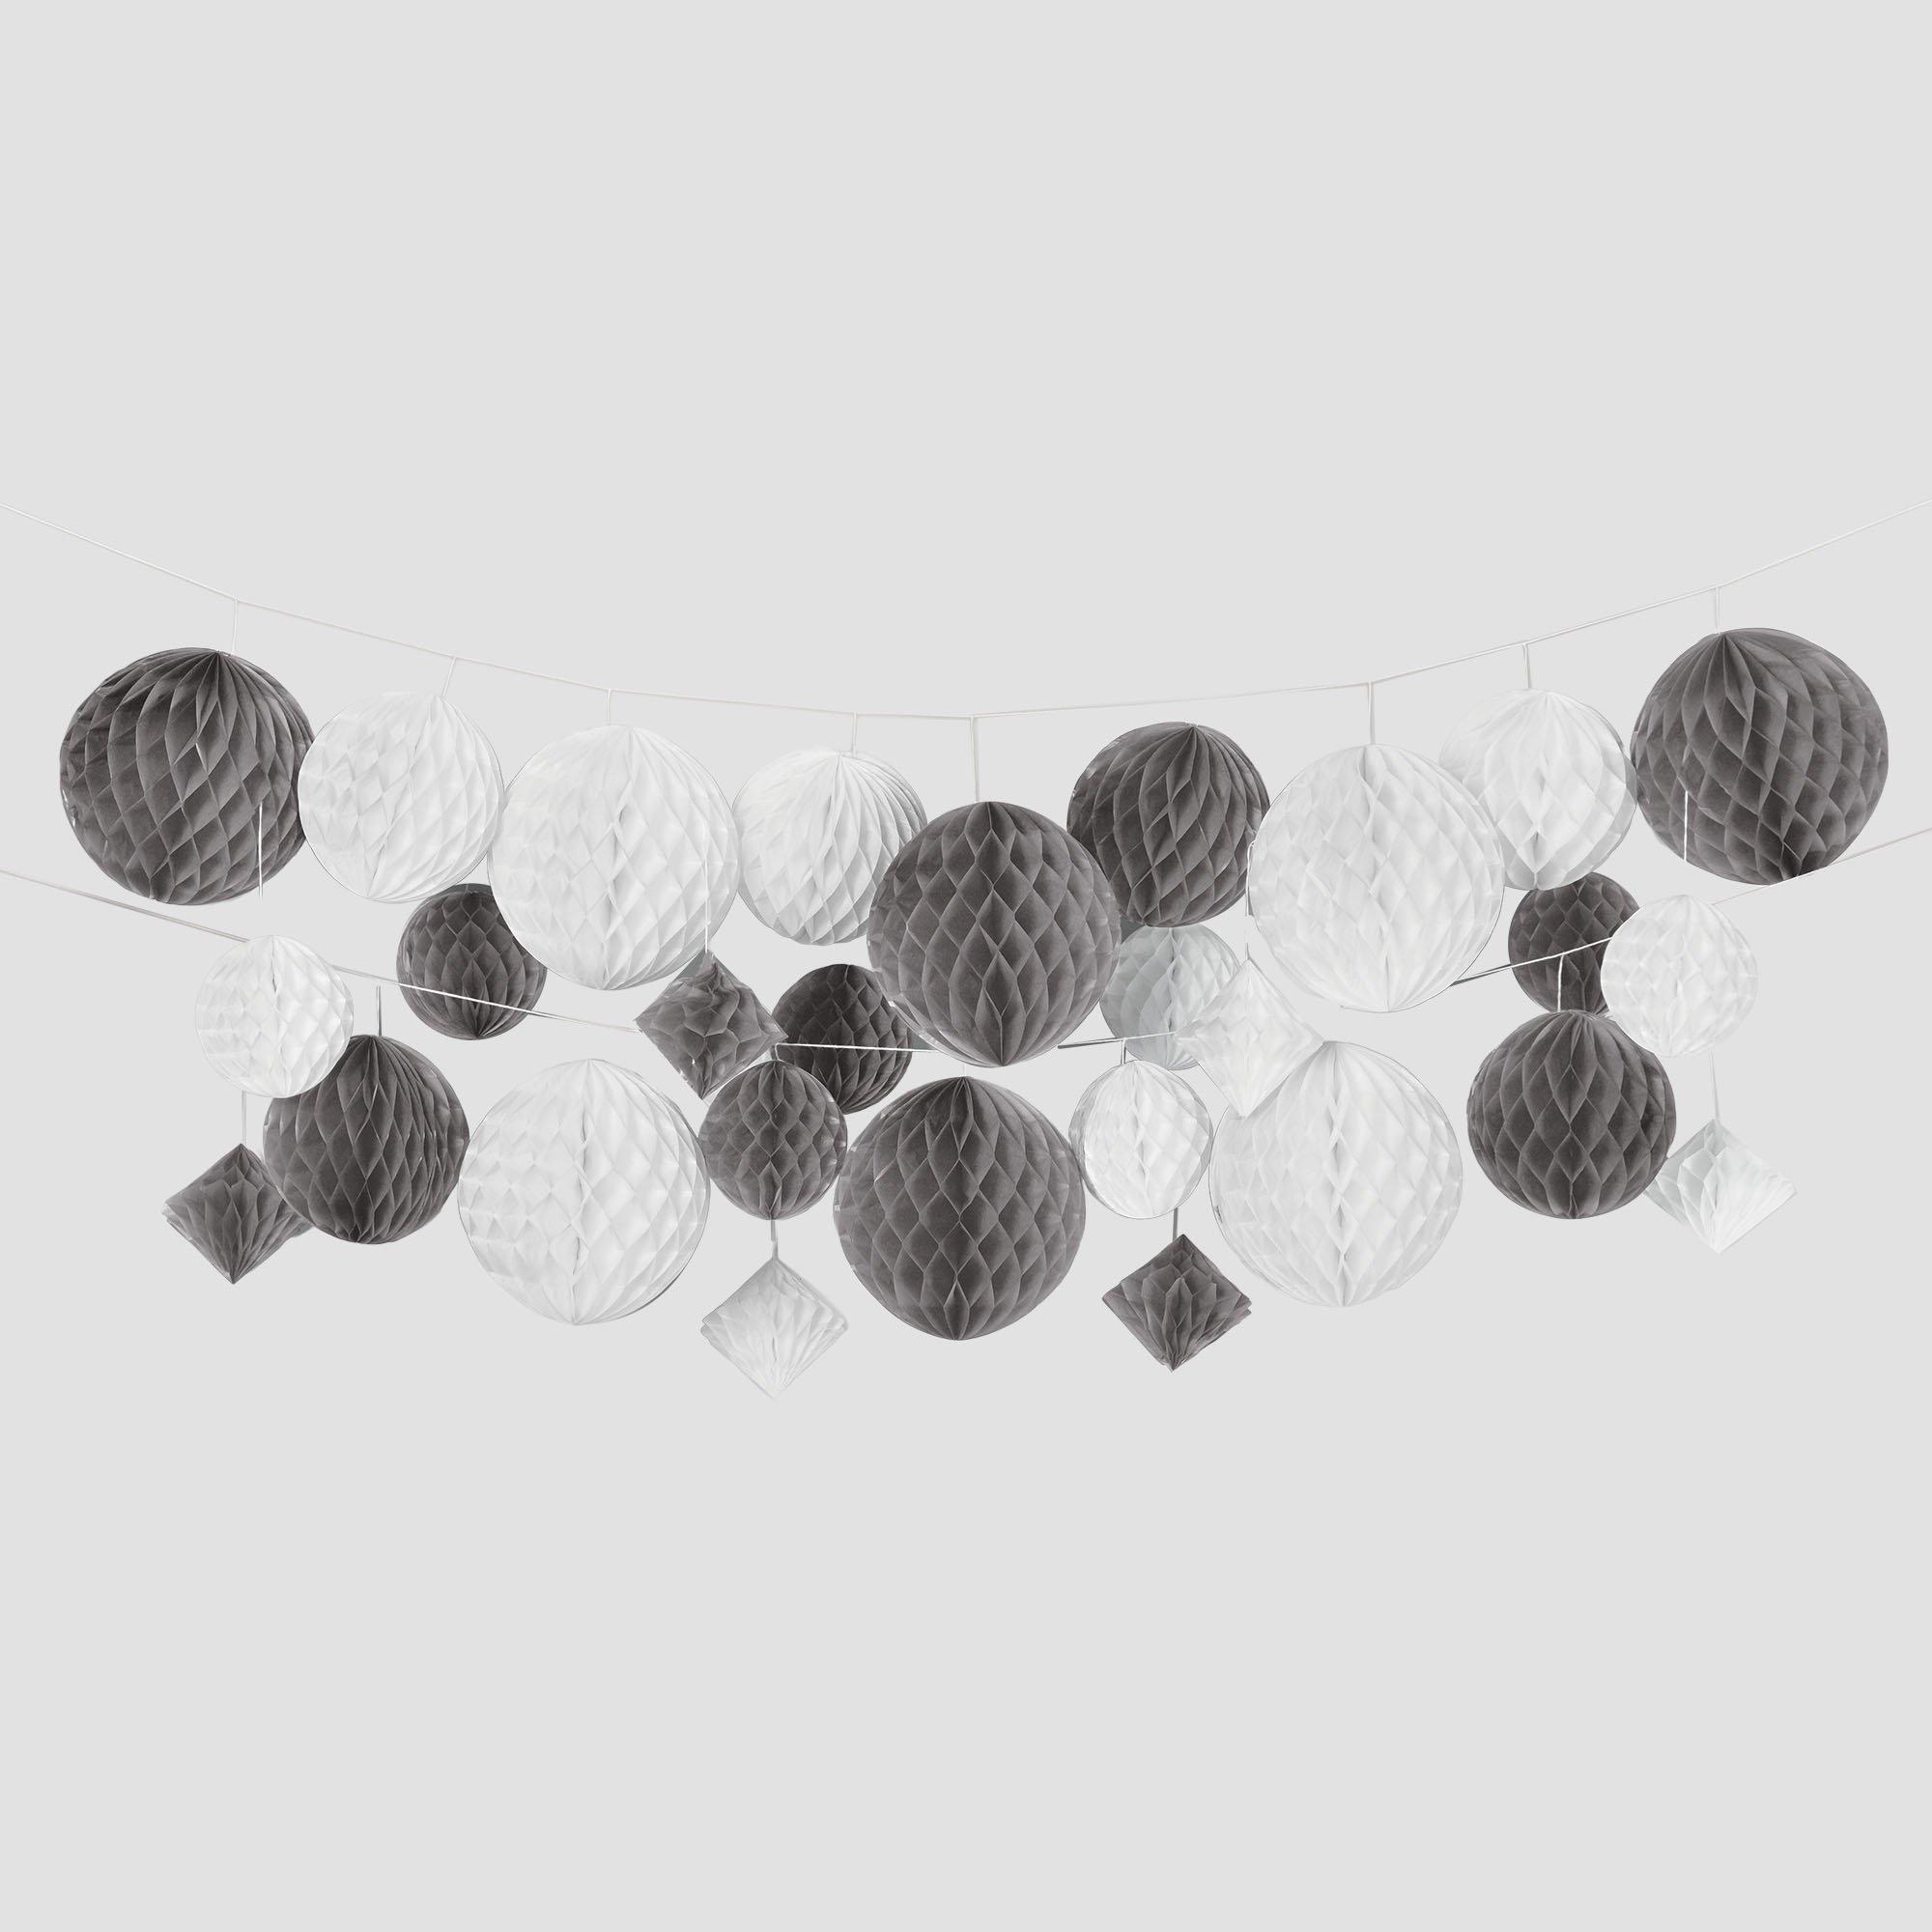 Silver & White Honeycomb Hanging Decorations, 12ft, 29pc | Party City